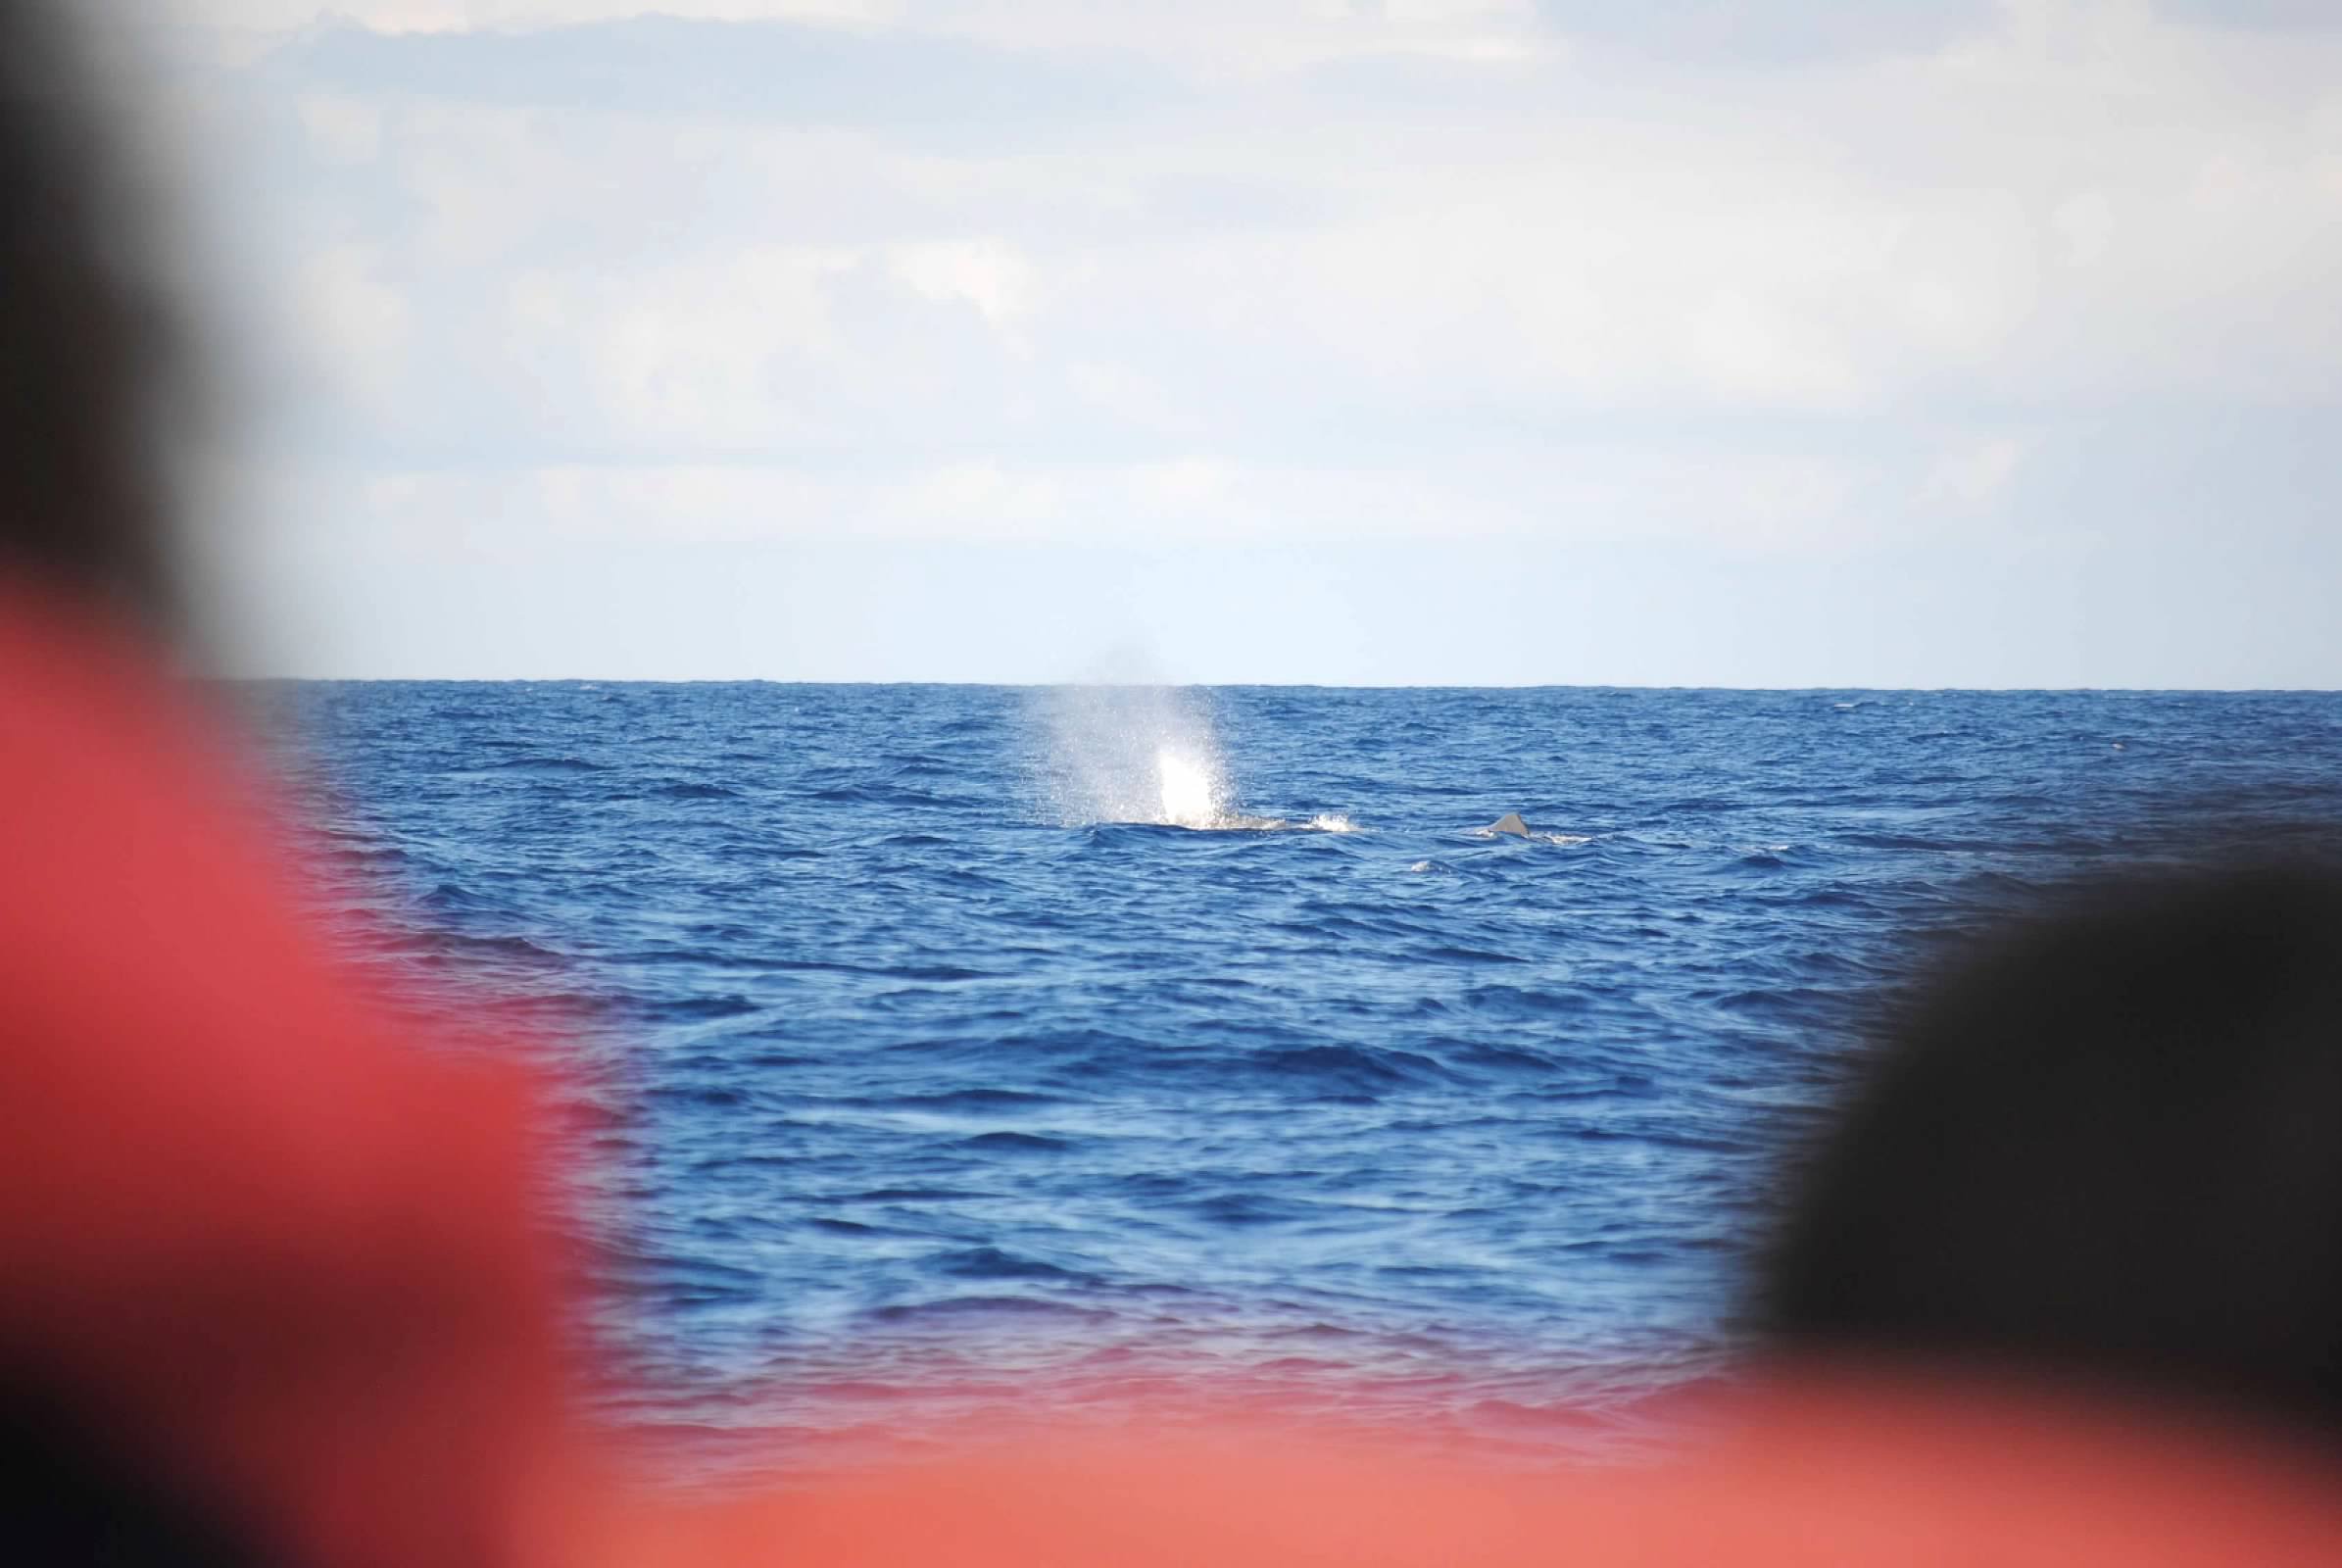 Sperm whale sighting in the Azores